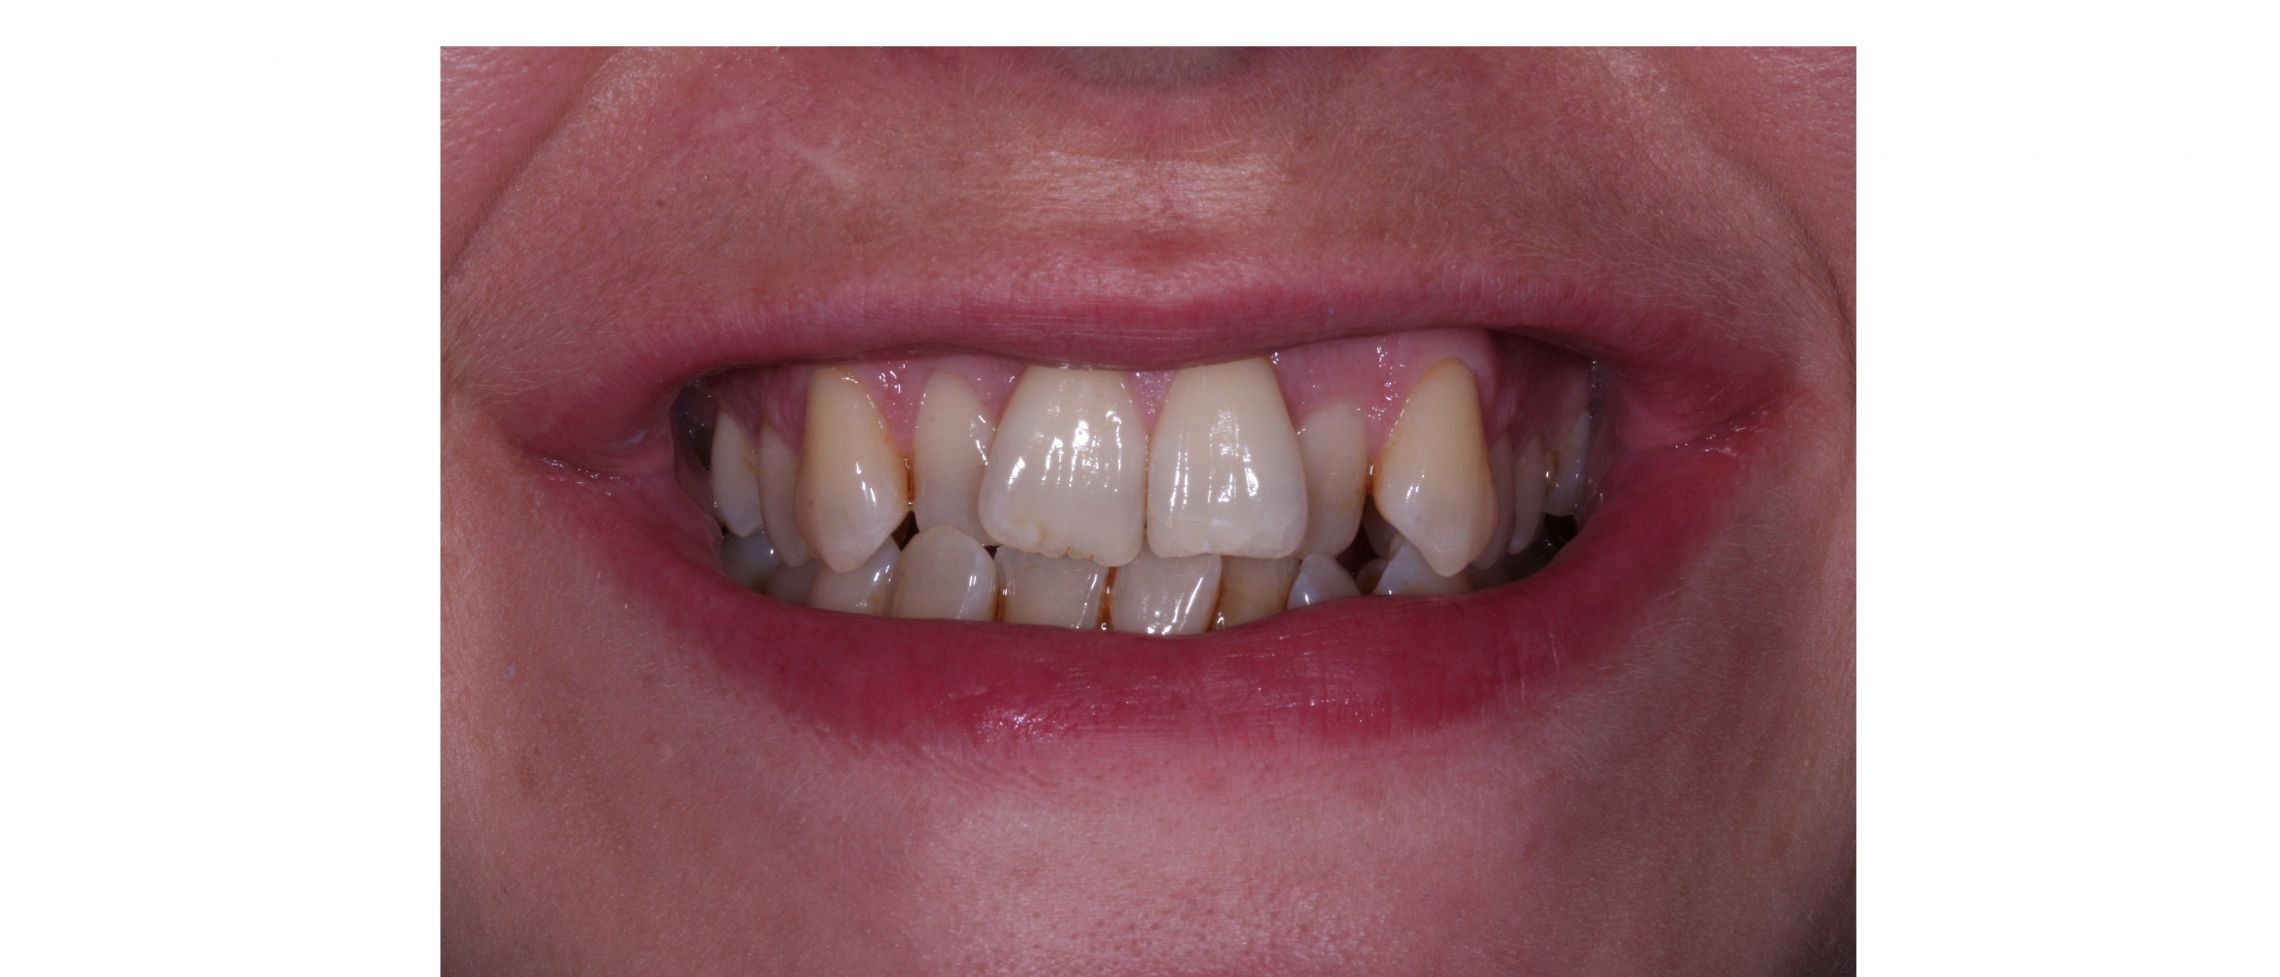 Case1 - before treatment